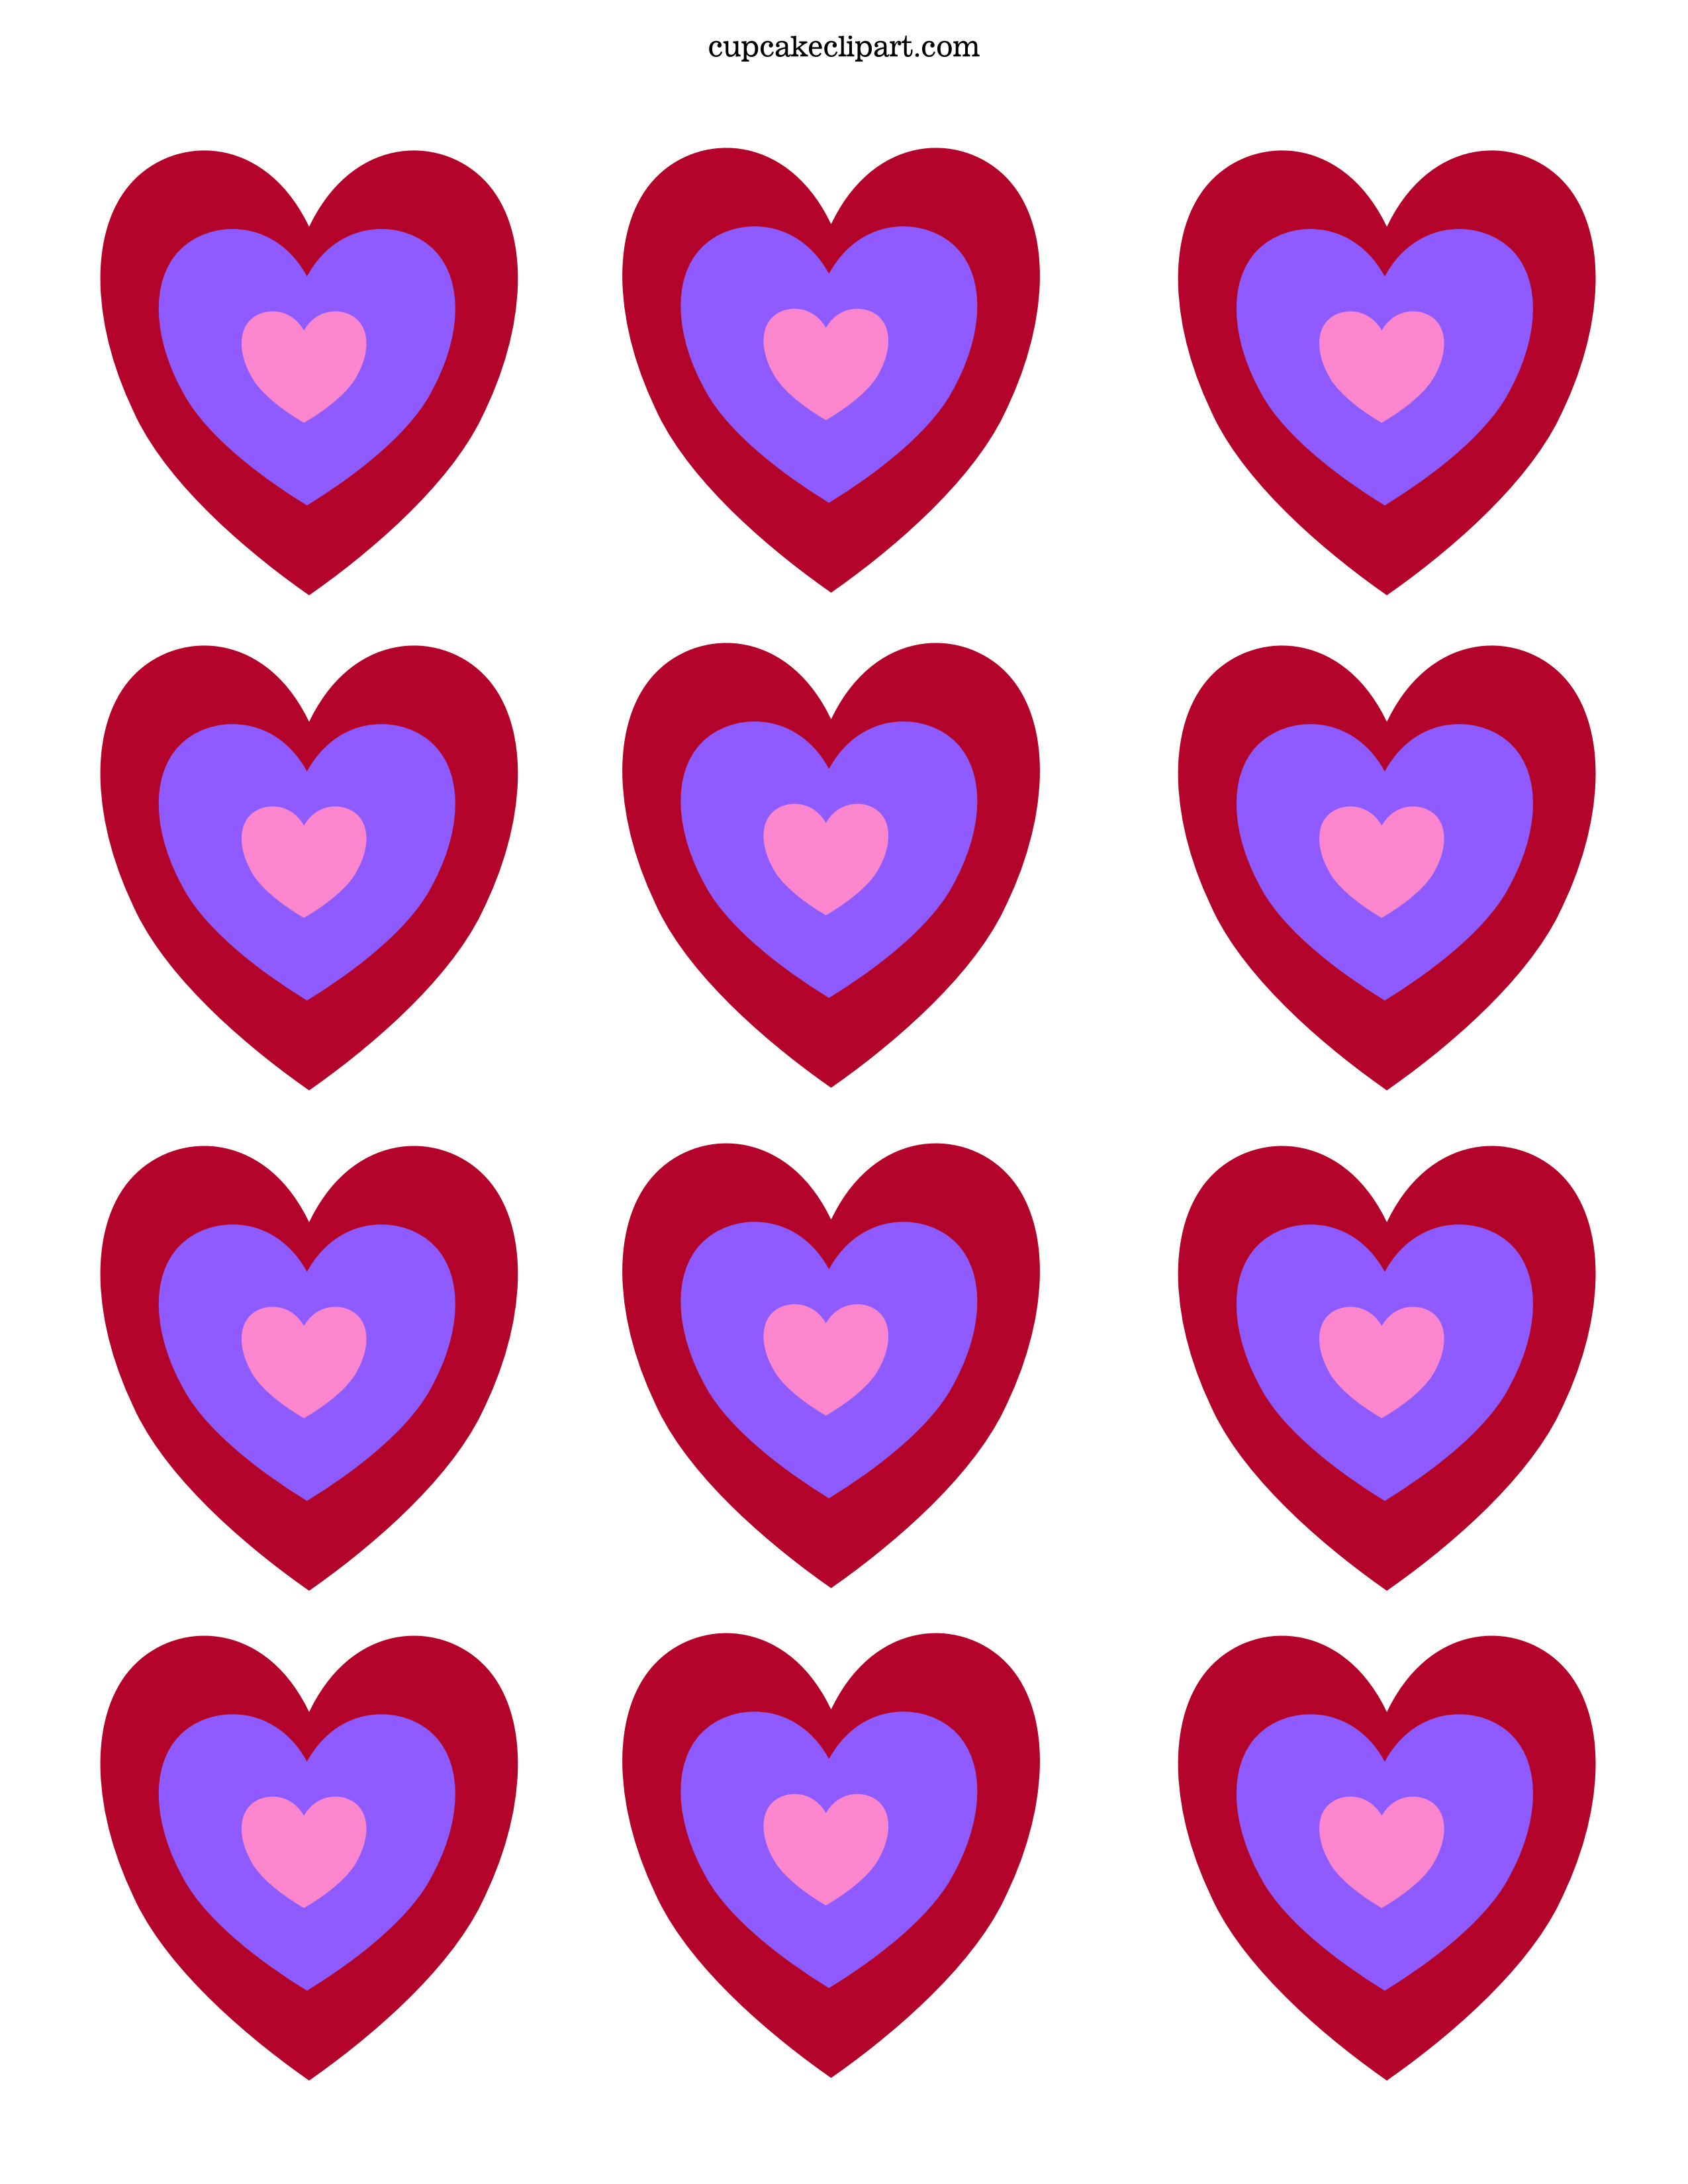 Tagged with: heart , printable cupcake toppers , valentine's day